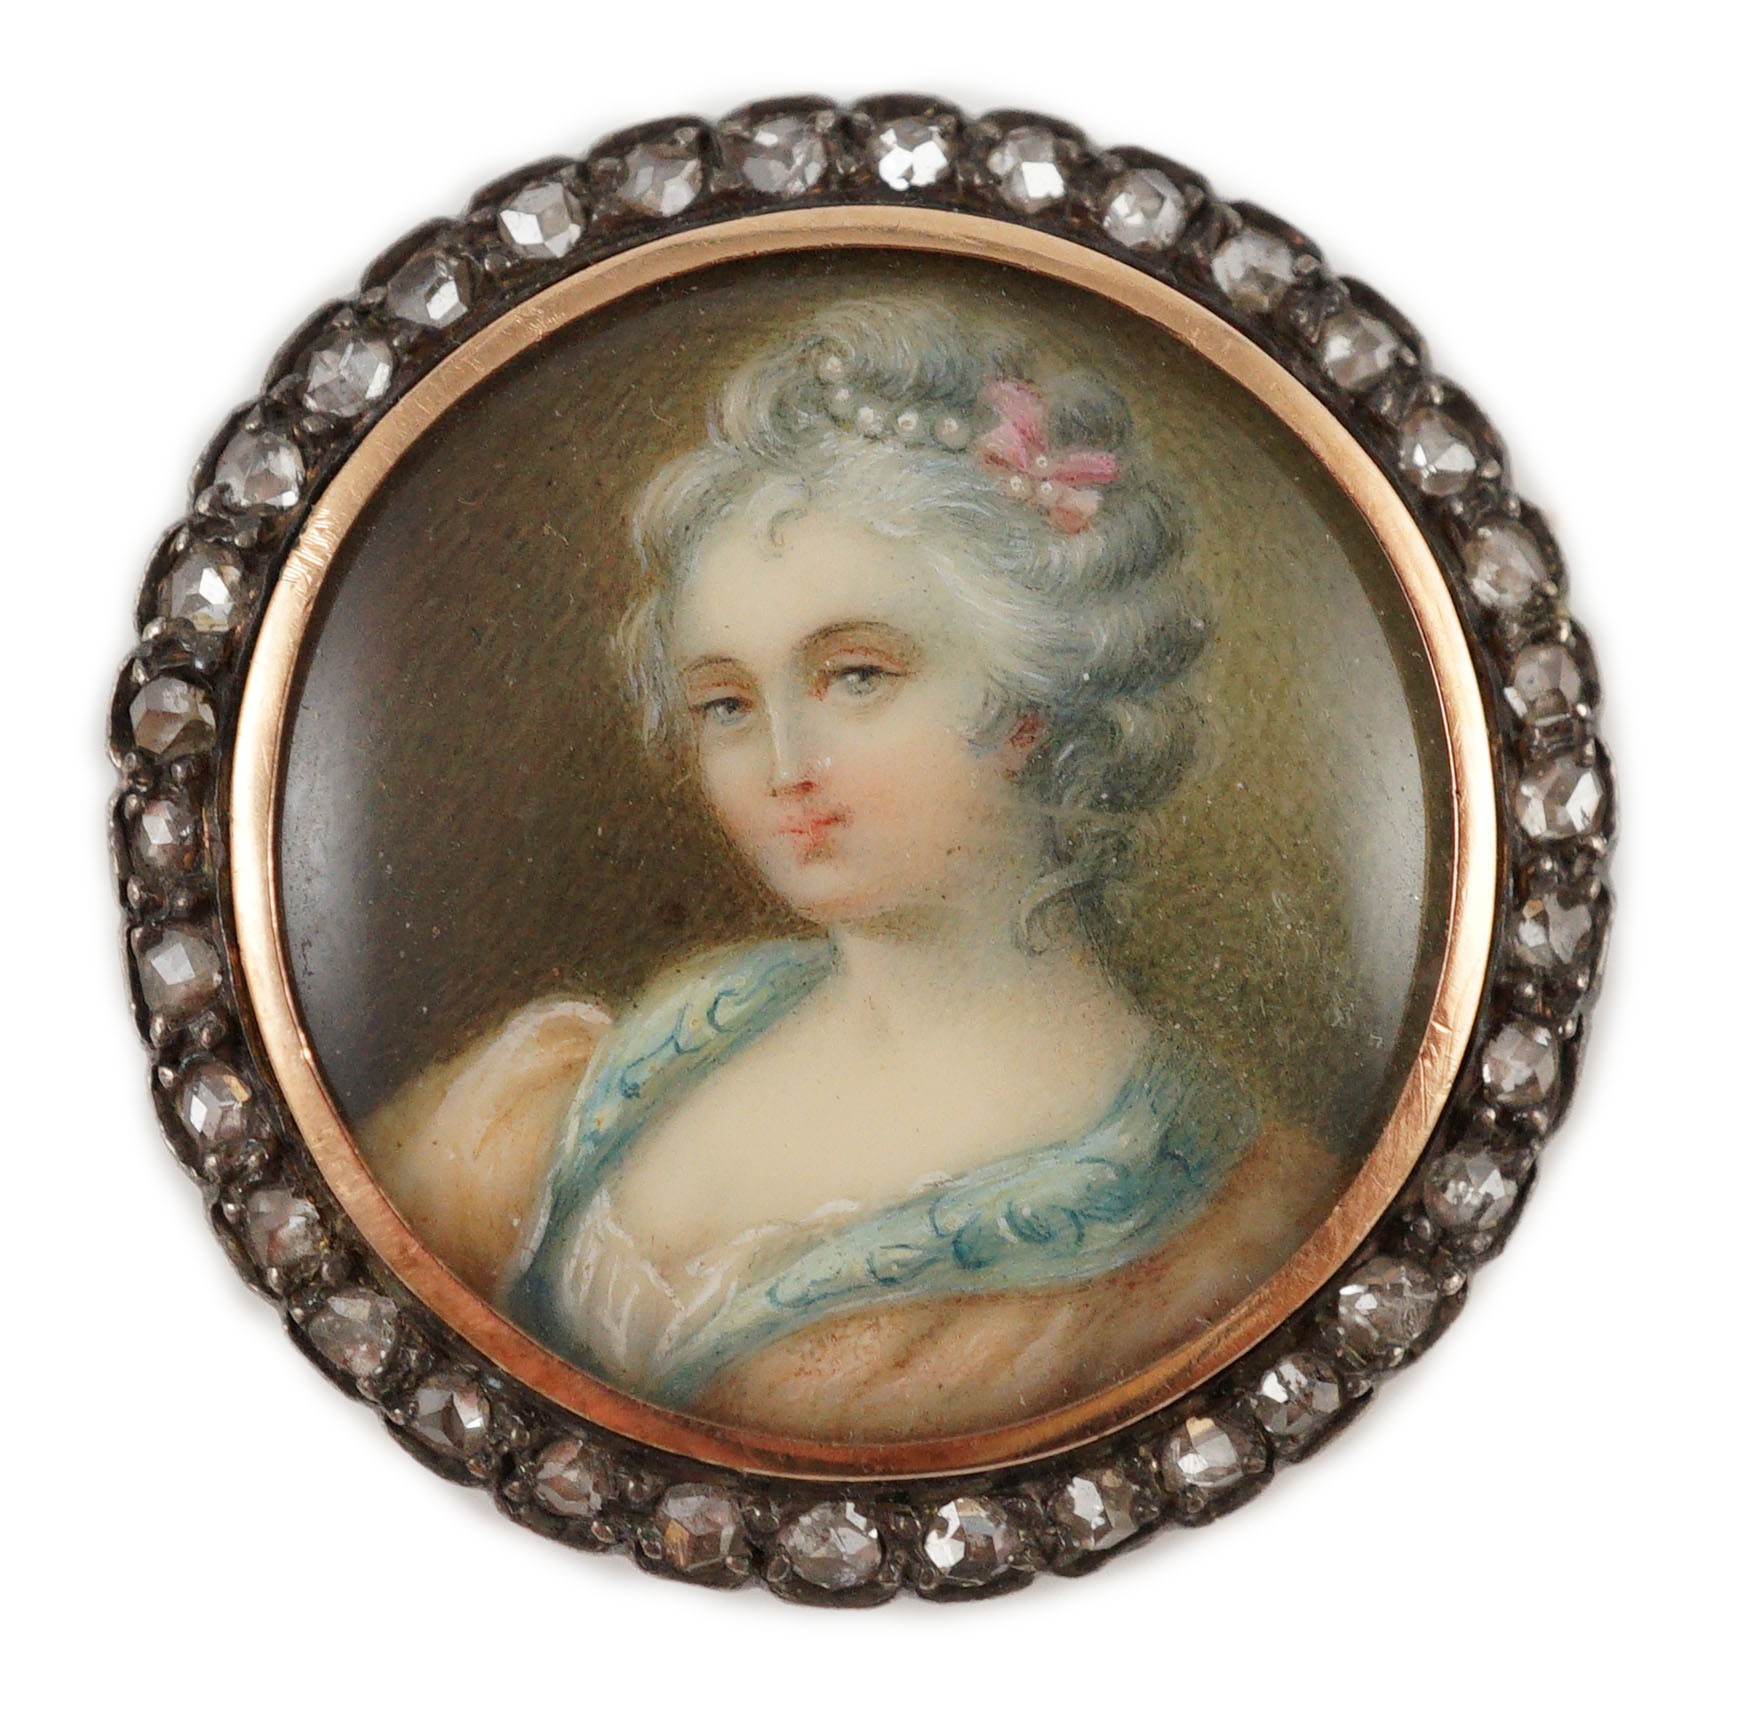 An Edwardian diamond set circular gold brooch with inset miniature portrait bust of a lady